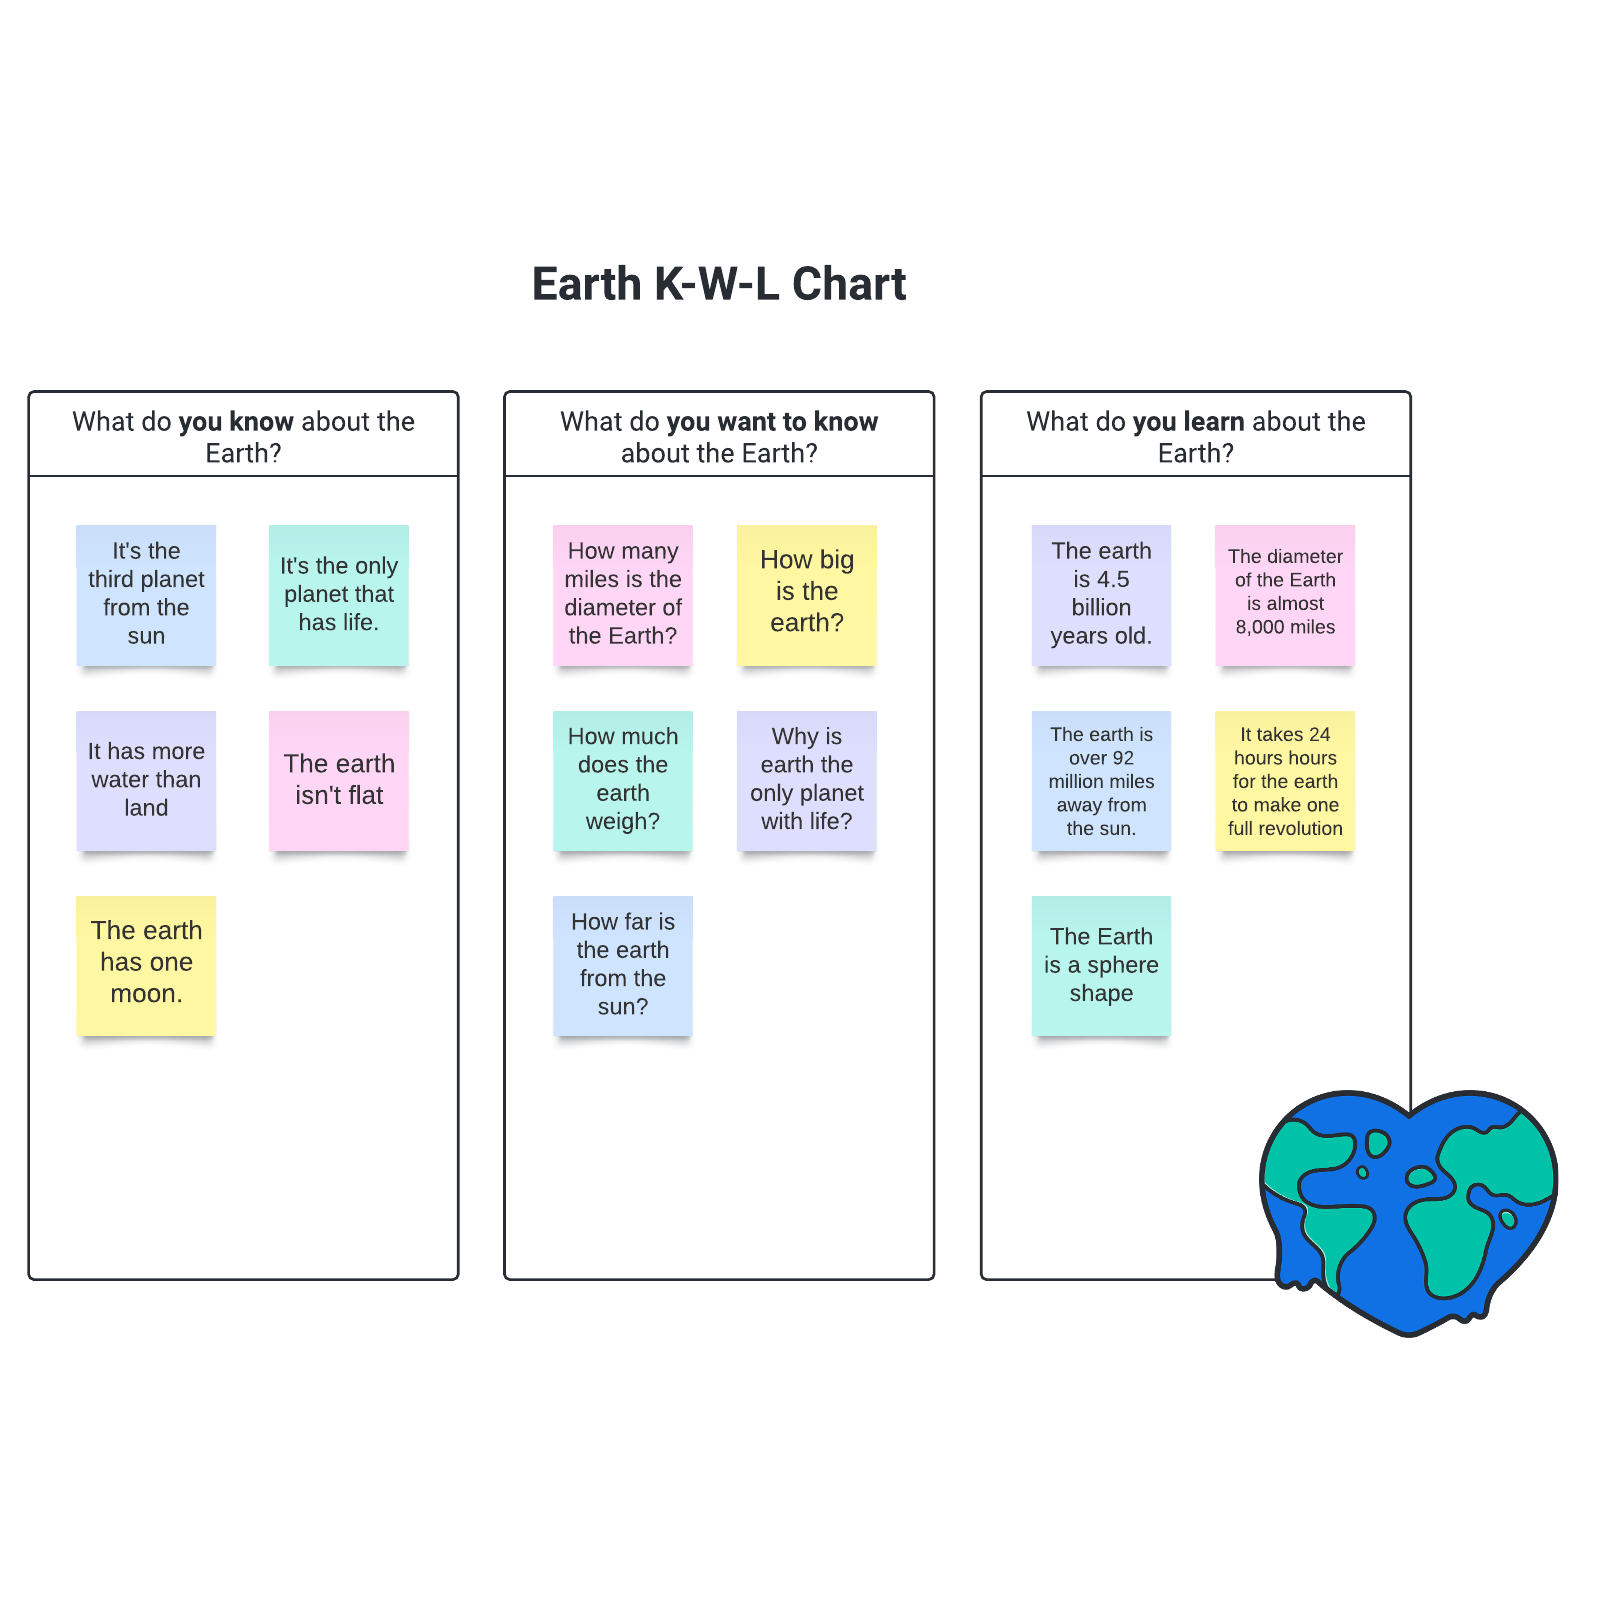 Earth K-W-L example